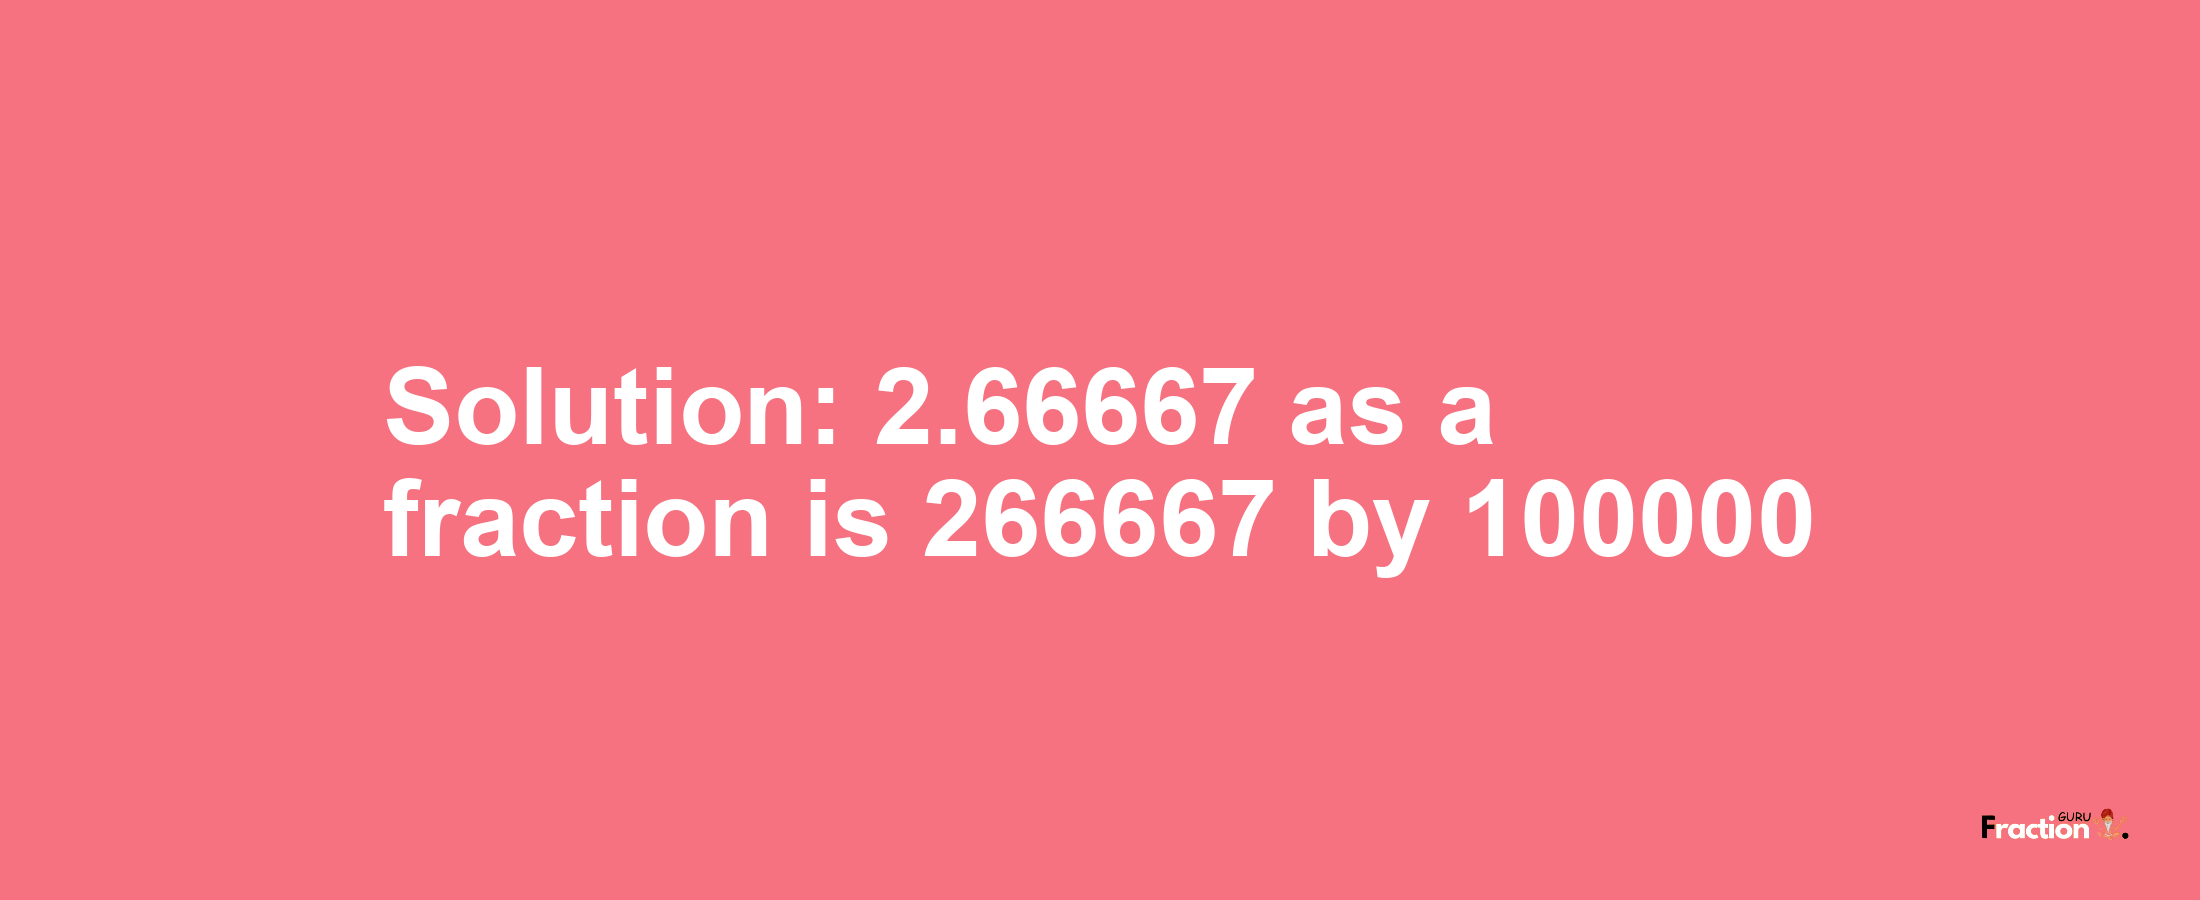 Solution:2.66667 as a fraction is 266667/100000